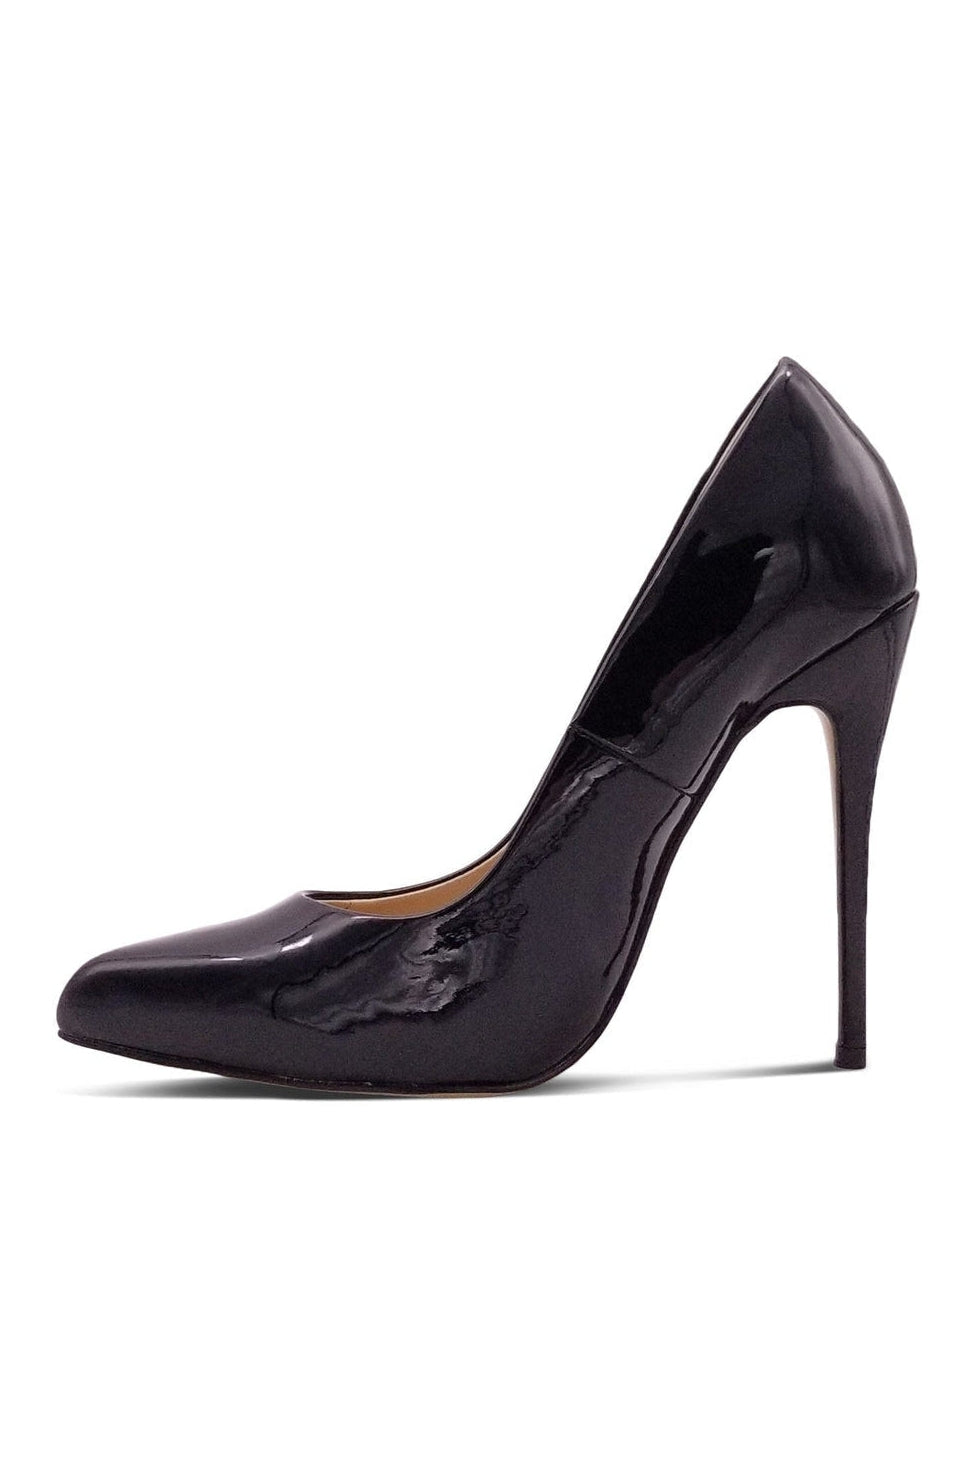 Sultry Low Cut Sky High Stiletto Heel Pump-Pumps- Stripper Shoes at SEXYSHOES.COM